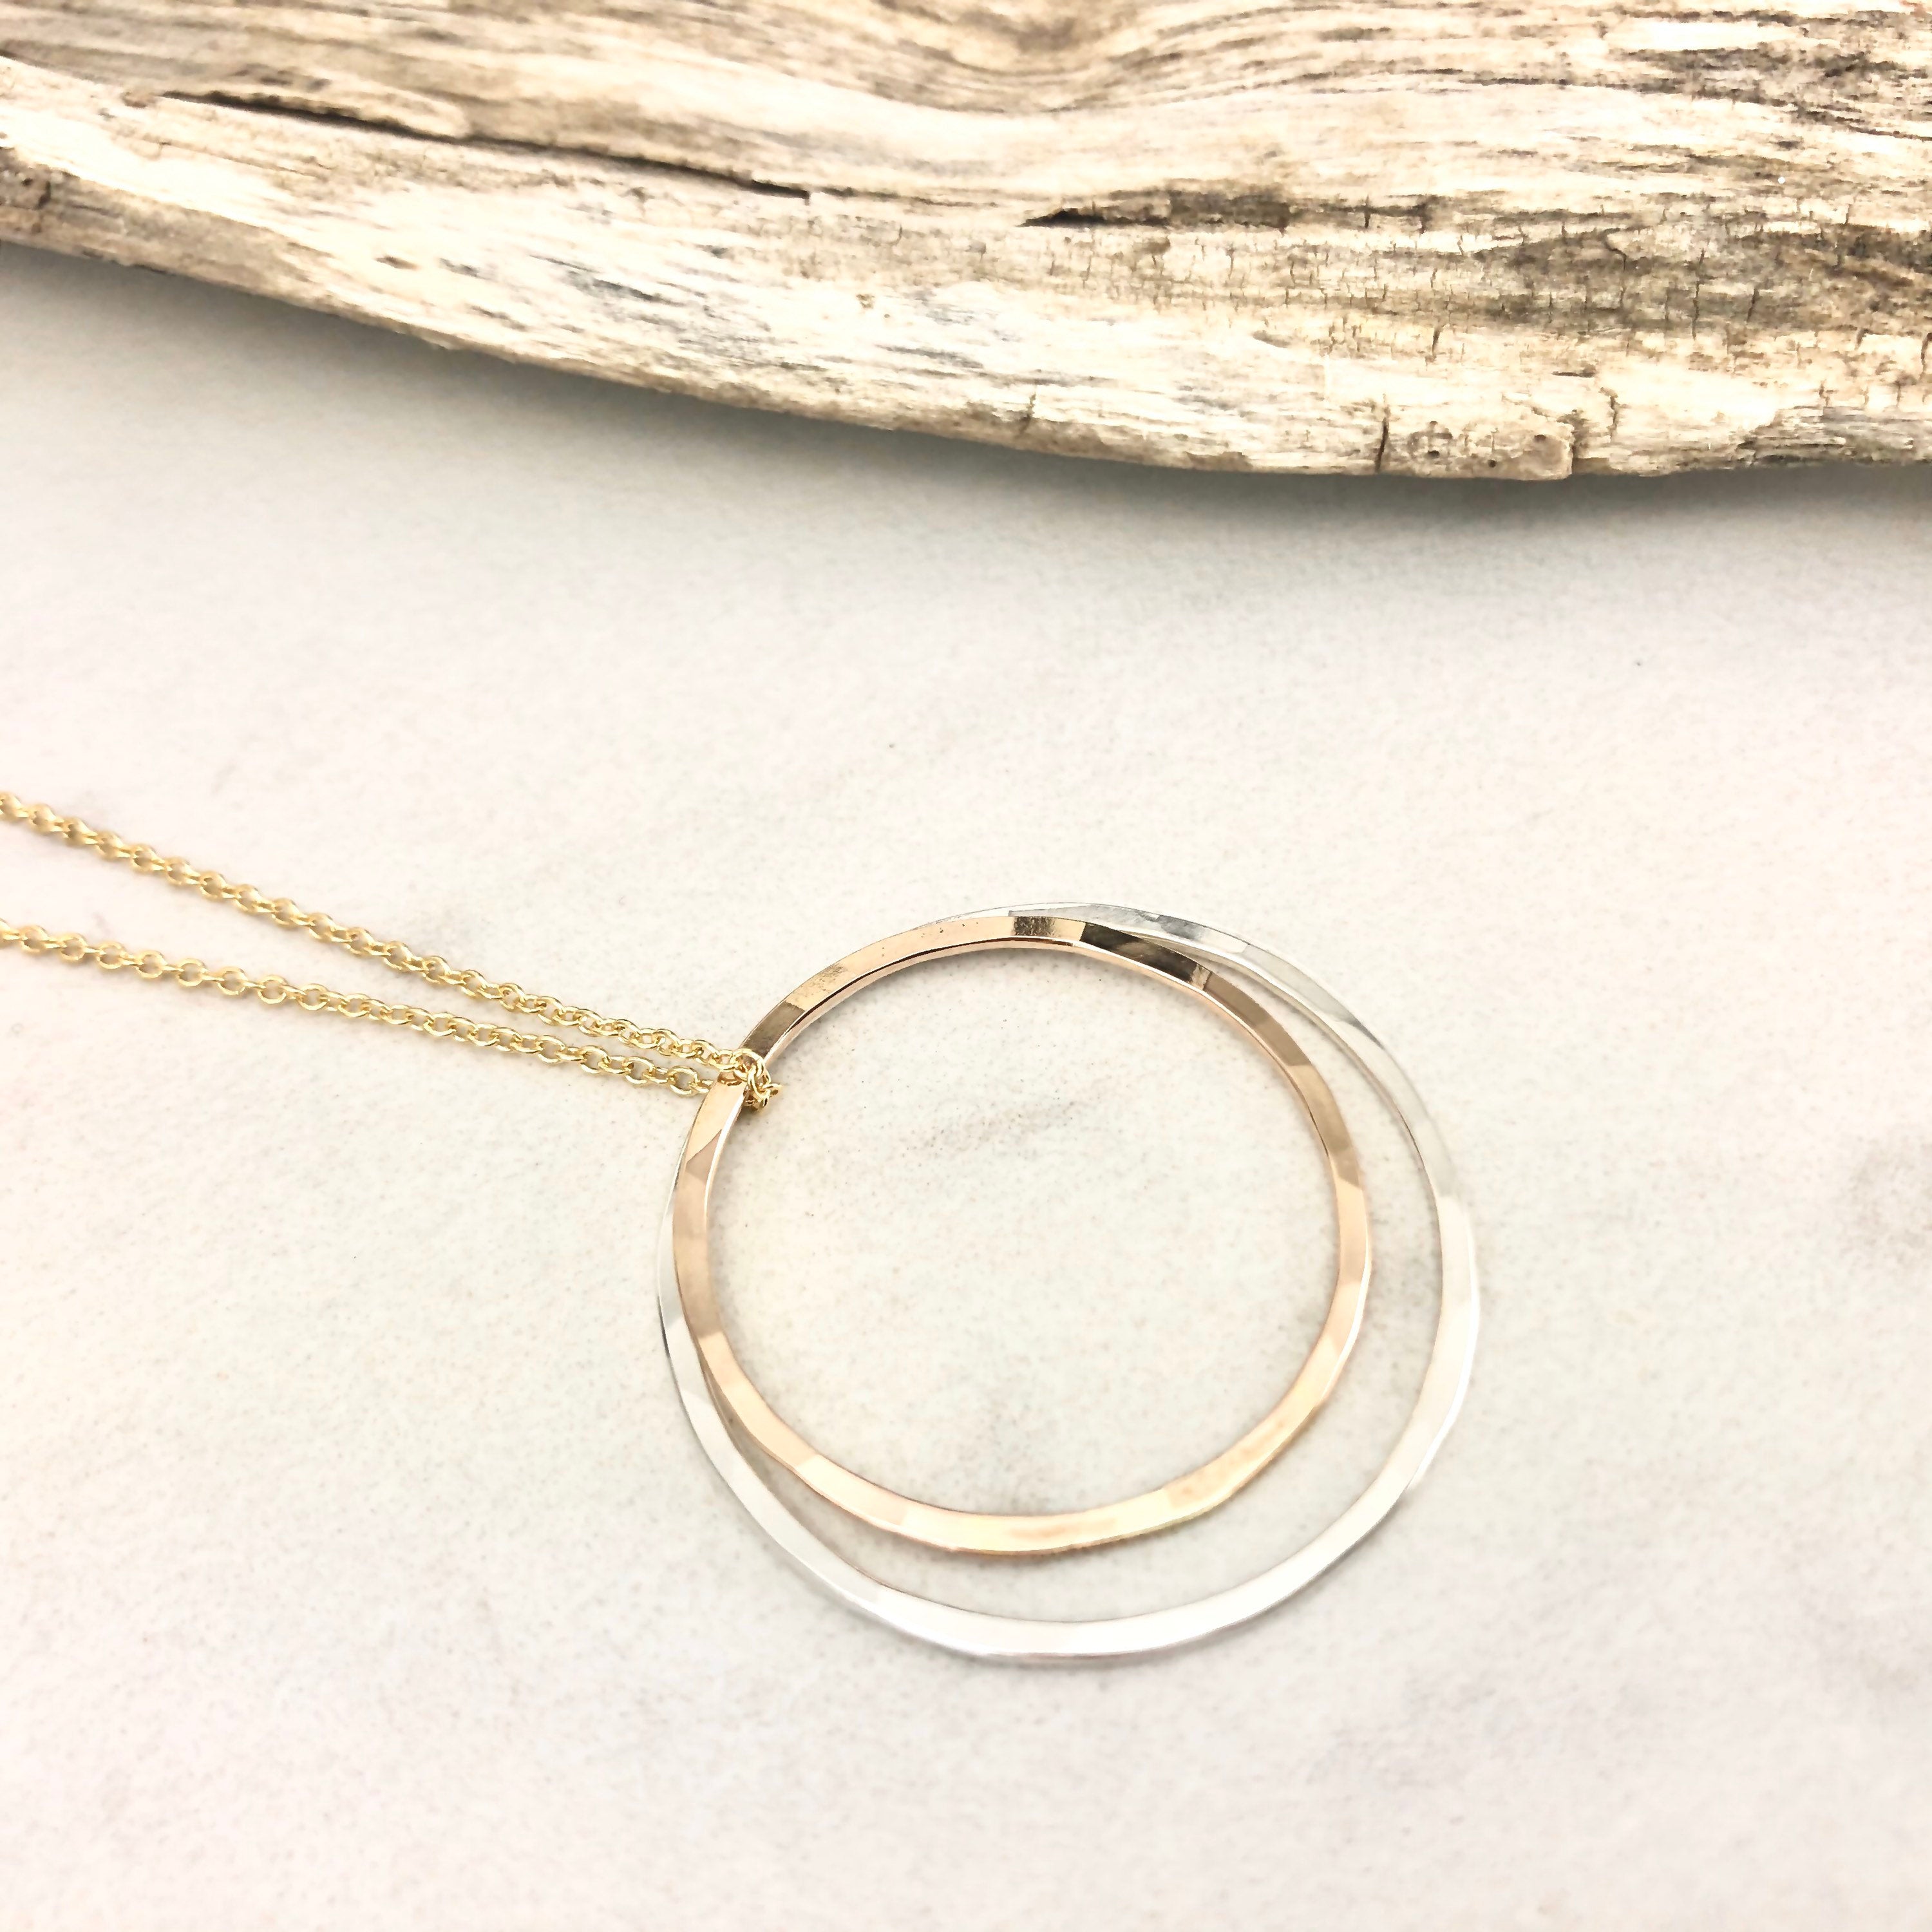 Gold and Sterling Silver Solar Eclipse Necklace